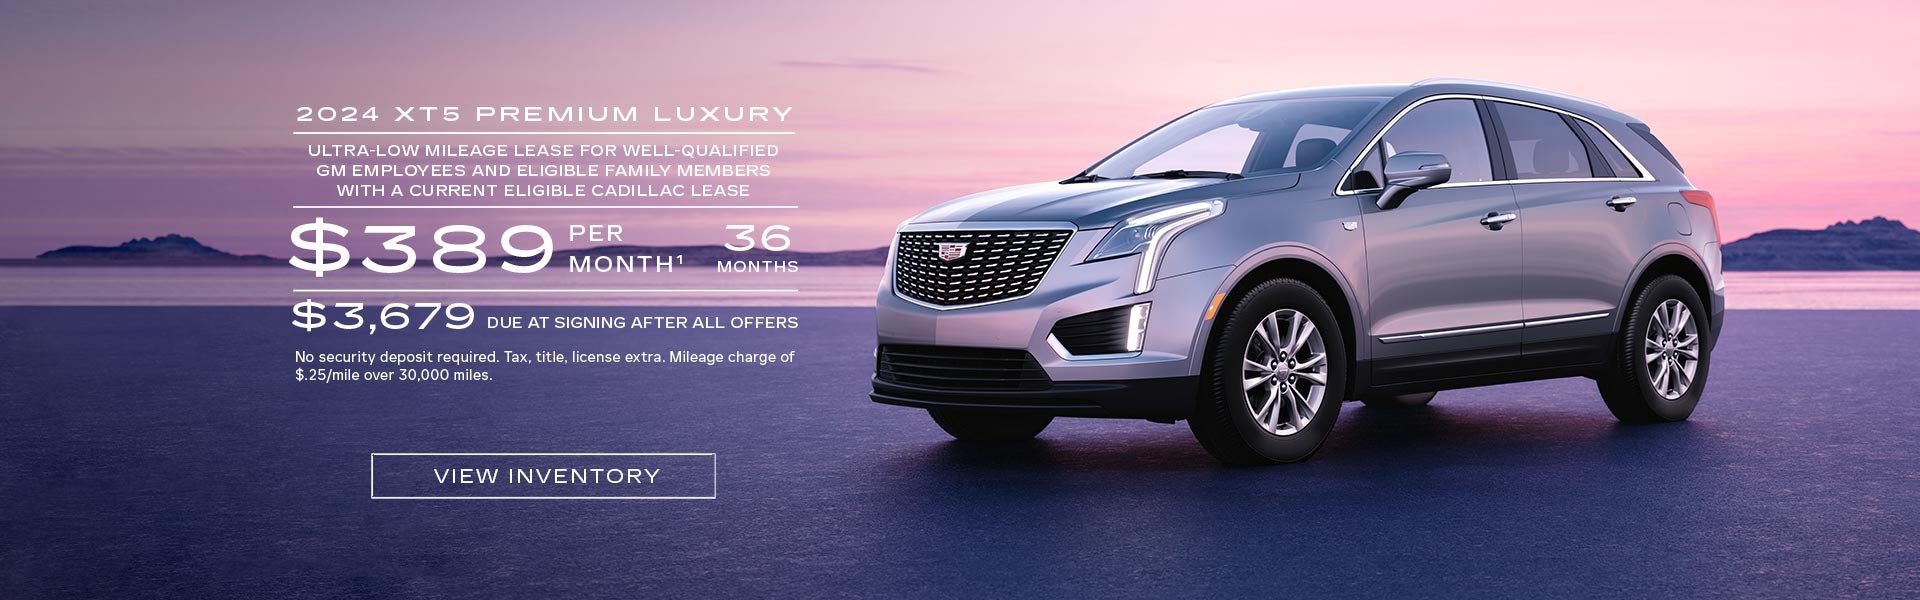 2024 XT5 Premium Luxury. Ultra-low mileage lease forfor well-qualified current eligible GM employ...